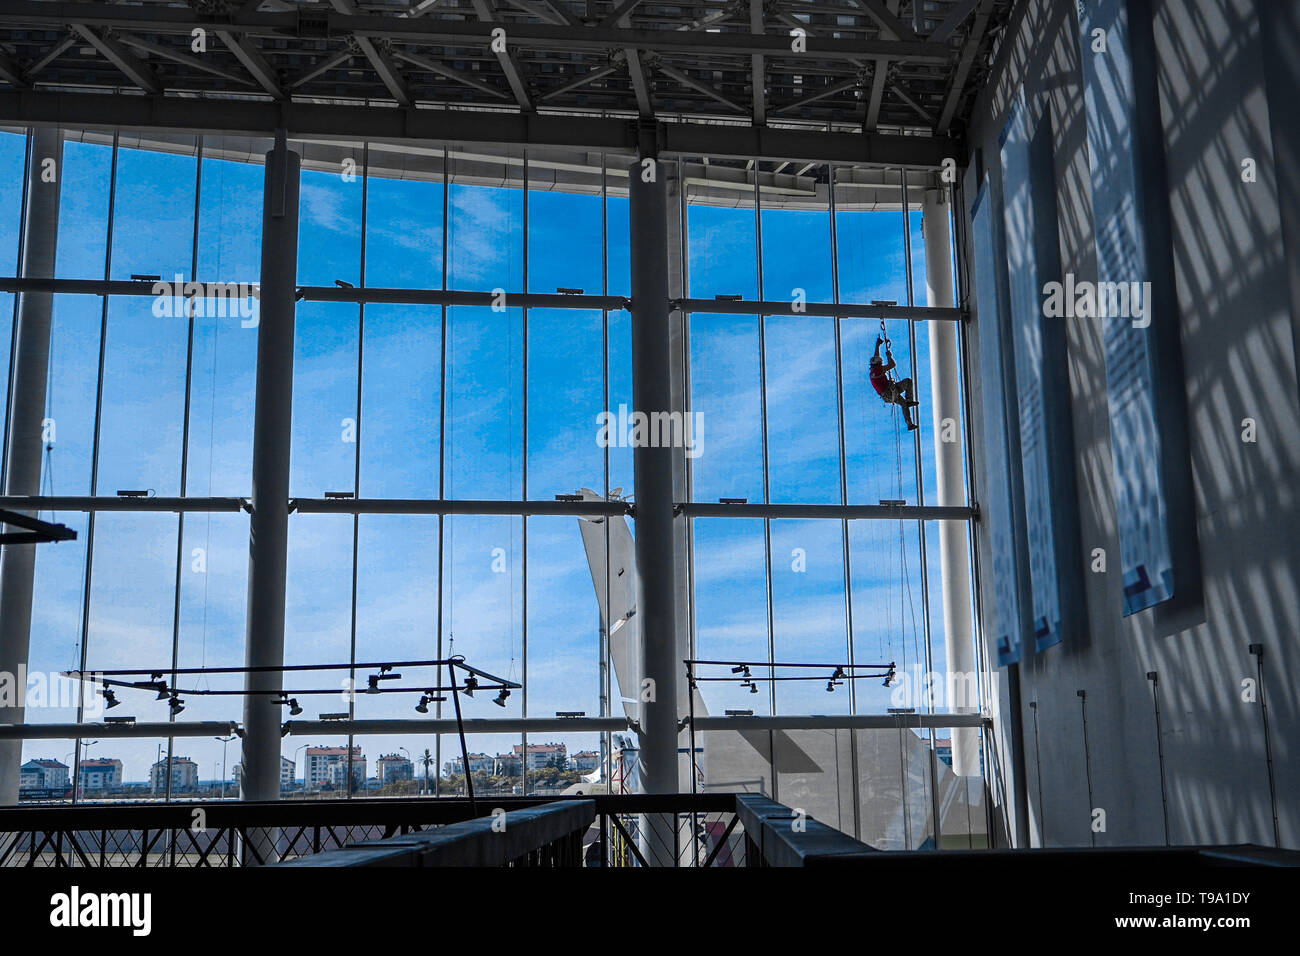 Industrial climber hangs from ropes inside shopping center or exhibition hall building against the blue sky, plenty of free space to sign Stock Photo